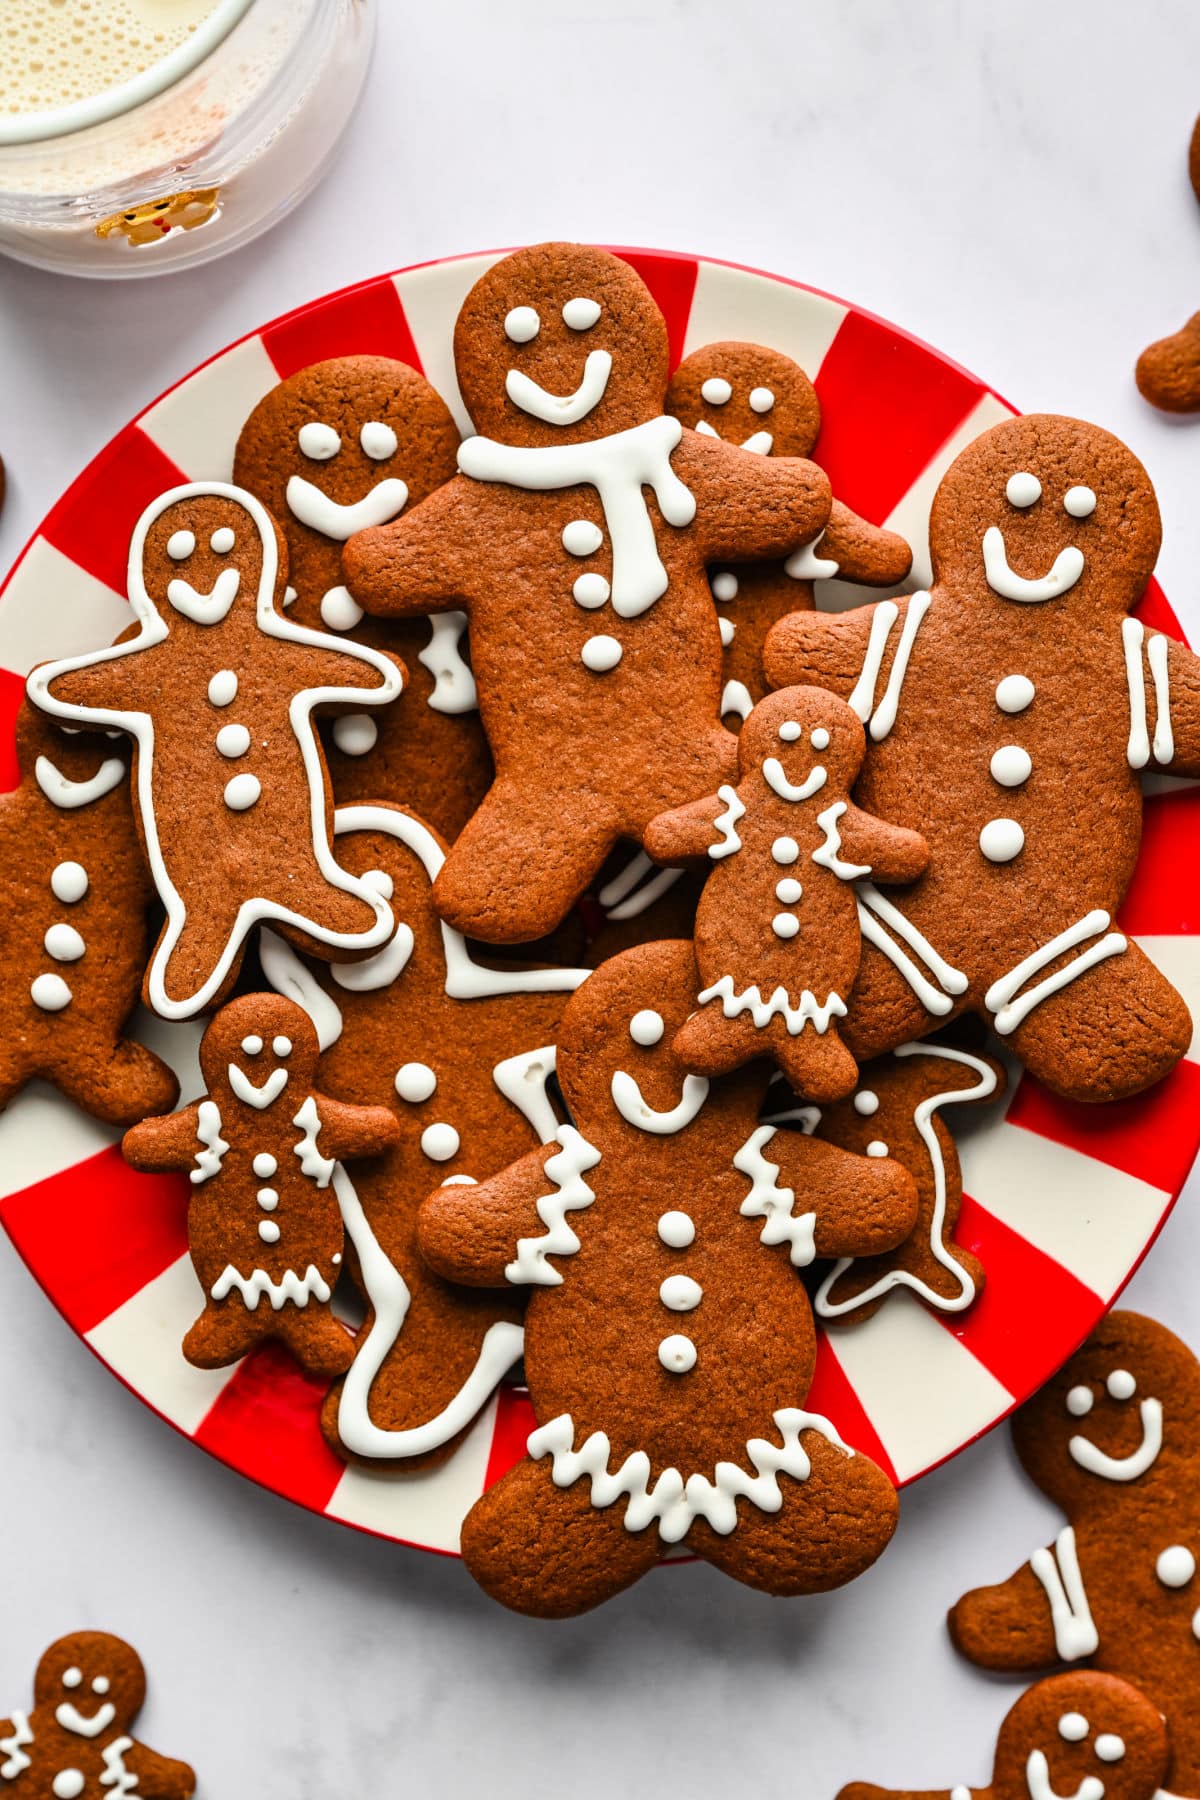 A red and white striped plate holding gingerbread men cookies stacked overlapping each other.